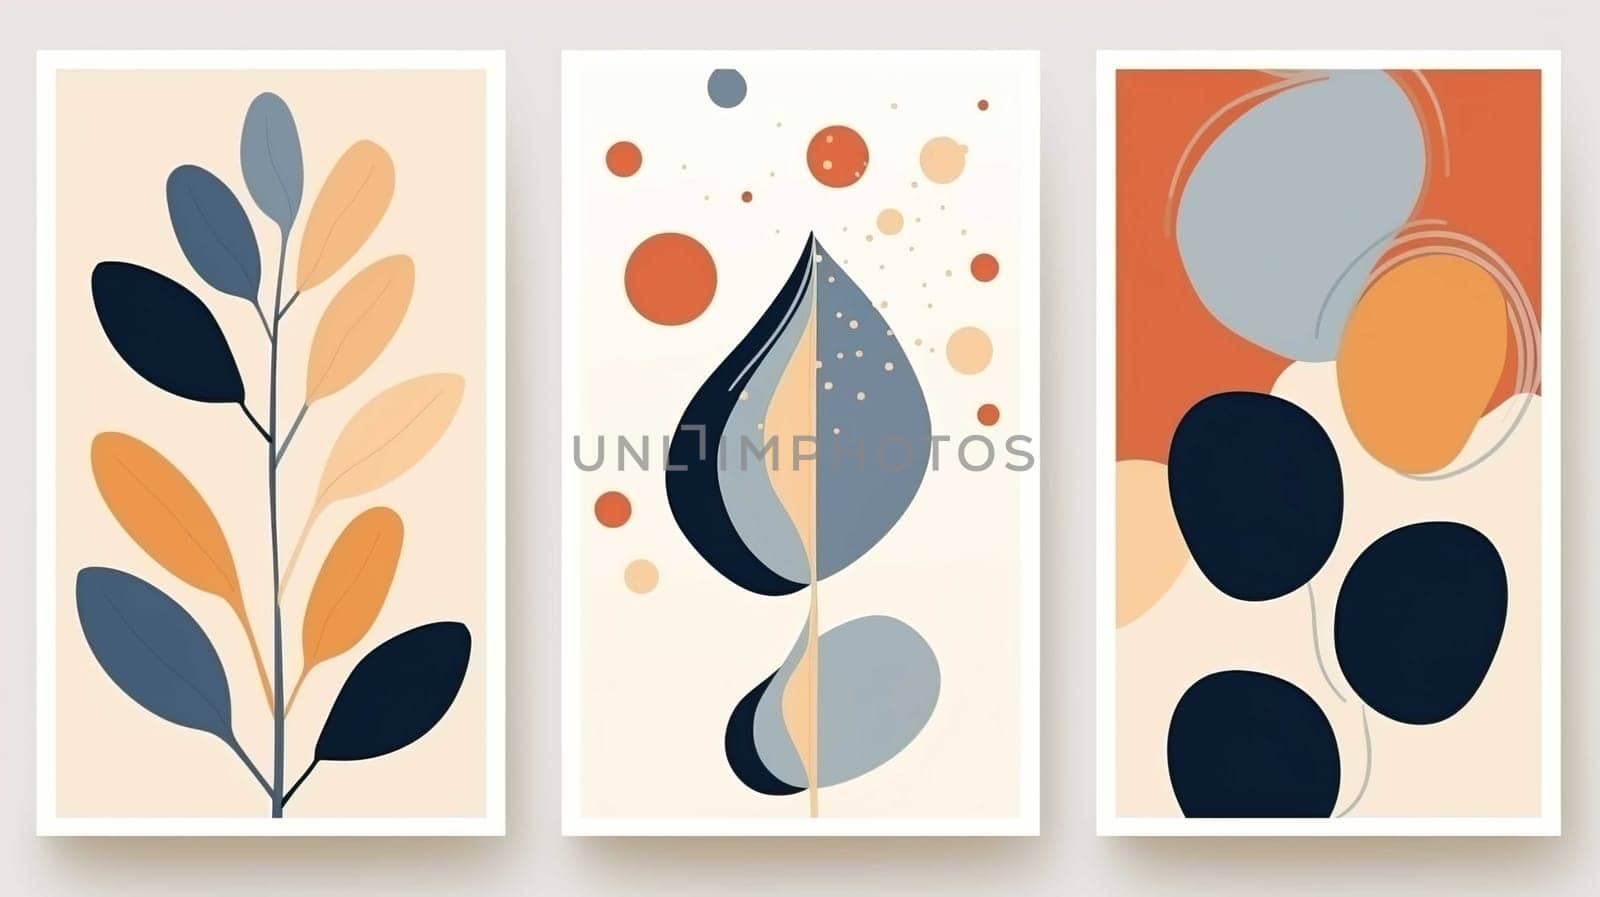 Hand drawn abstract shapes and plant motif layouts for banners, flyers, brochures, Generate AI